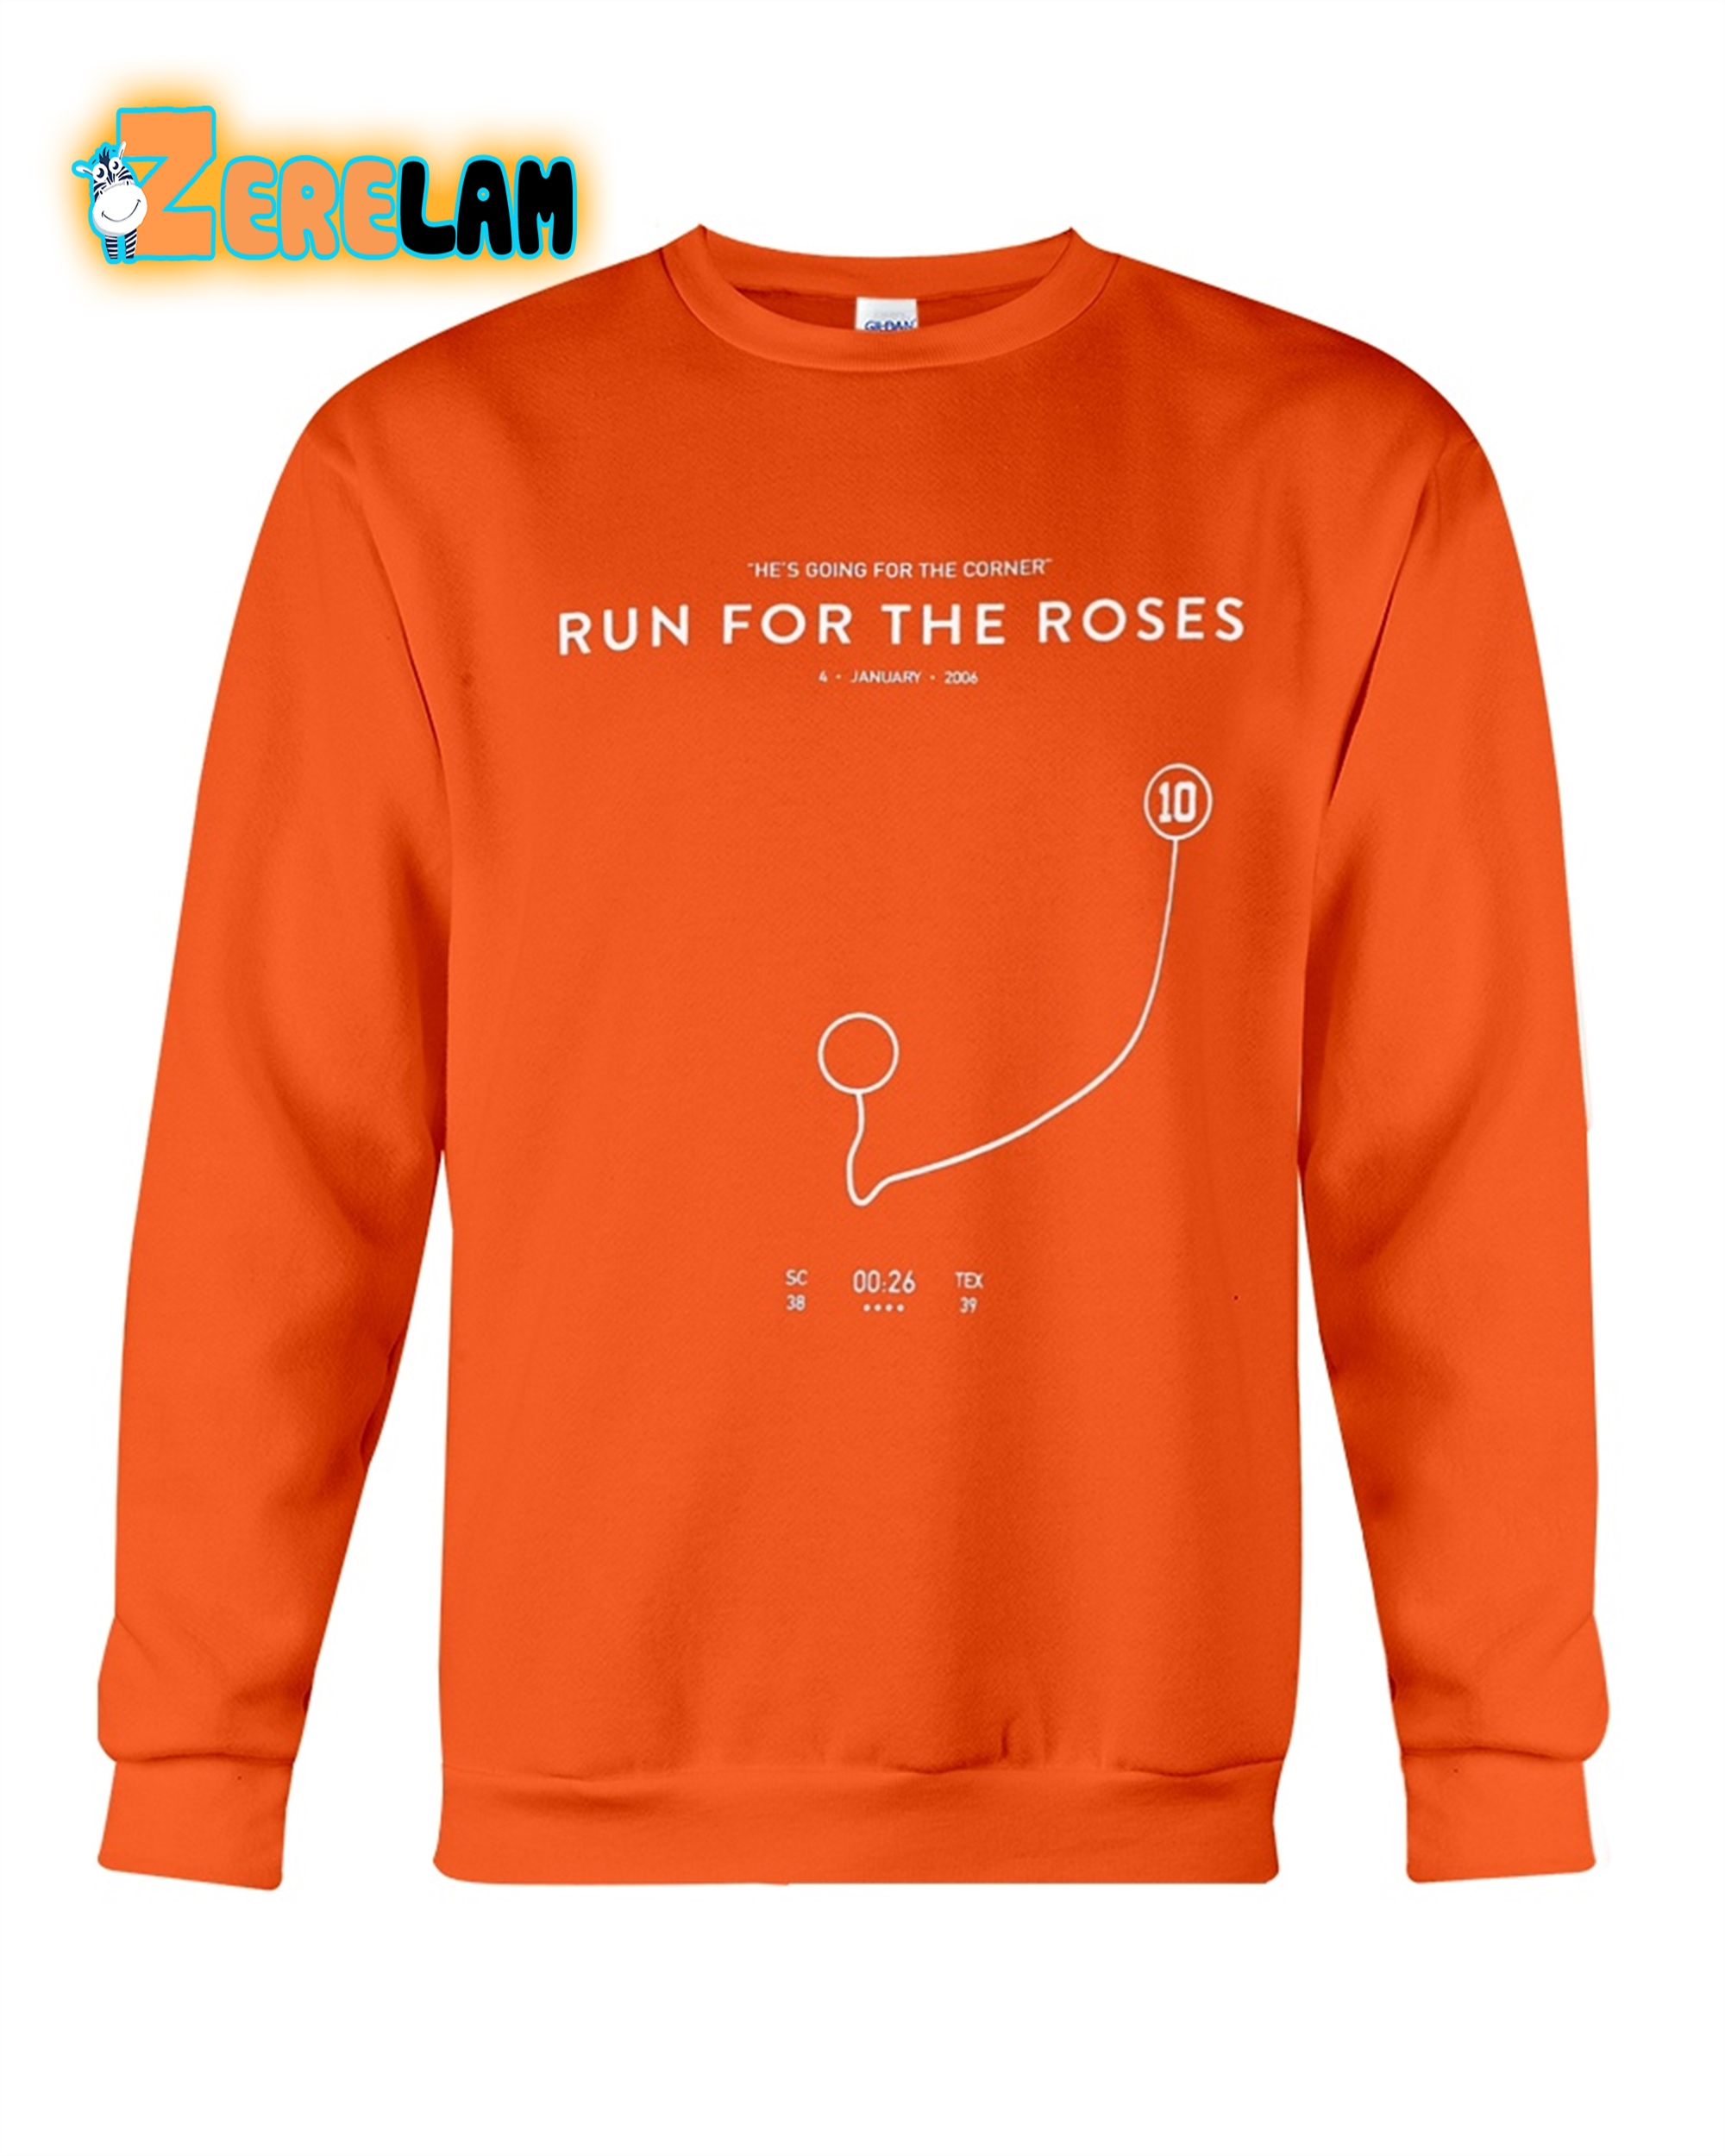 Run For The Roses He Going For The Corner Shirt 1